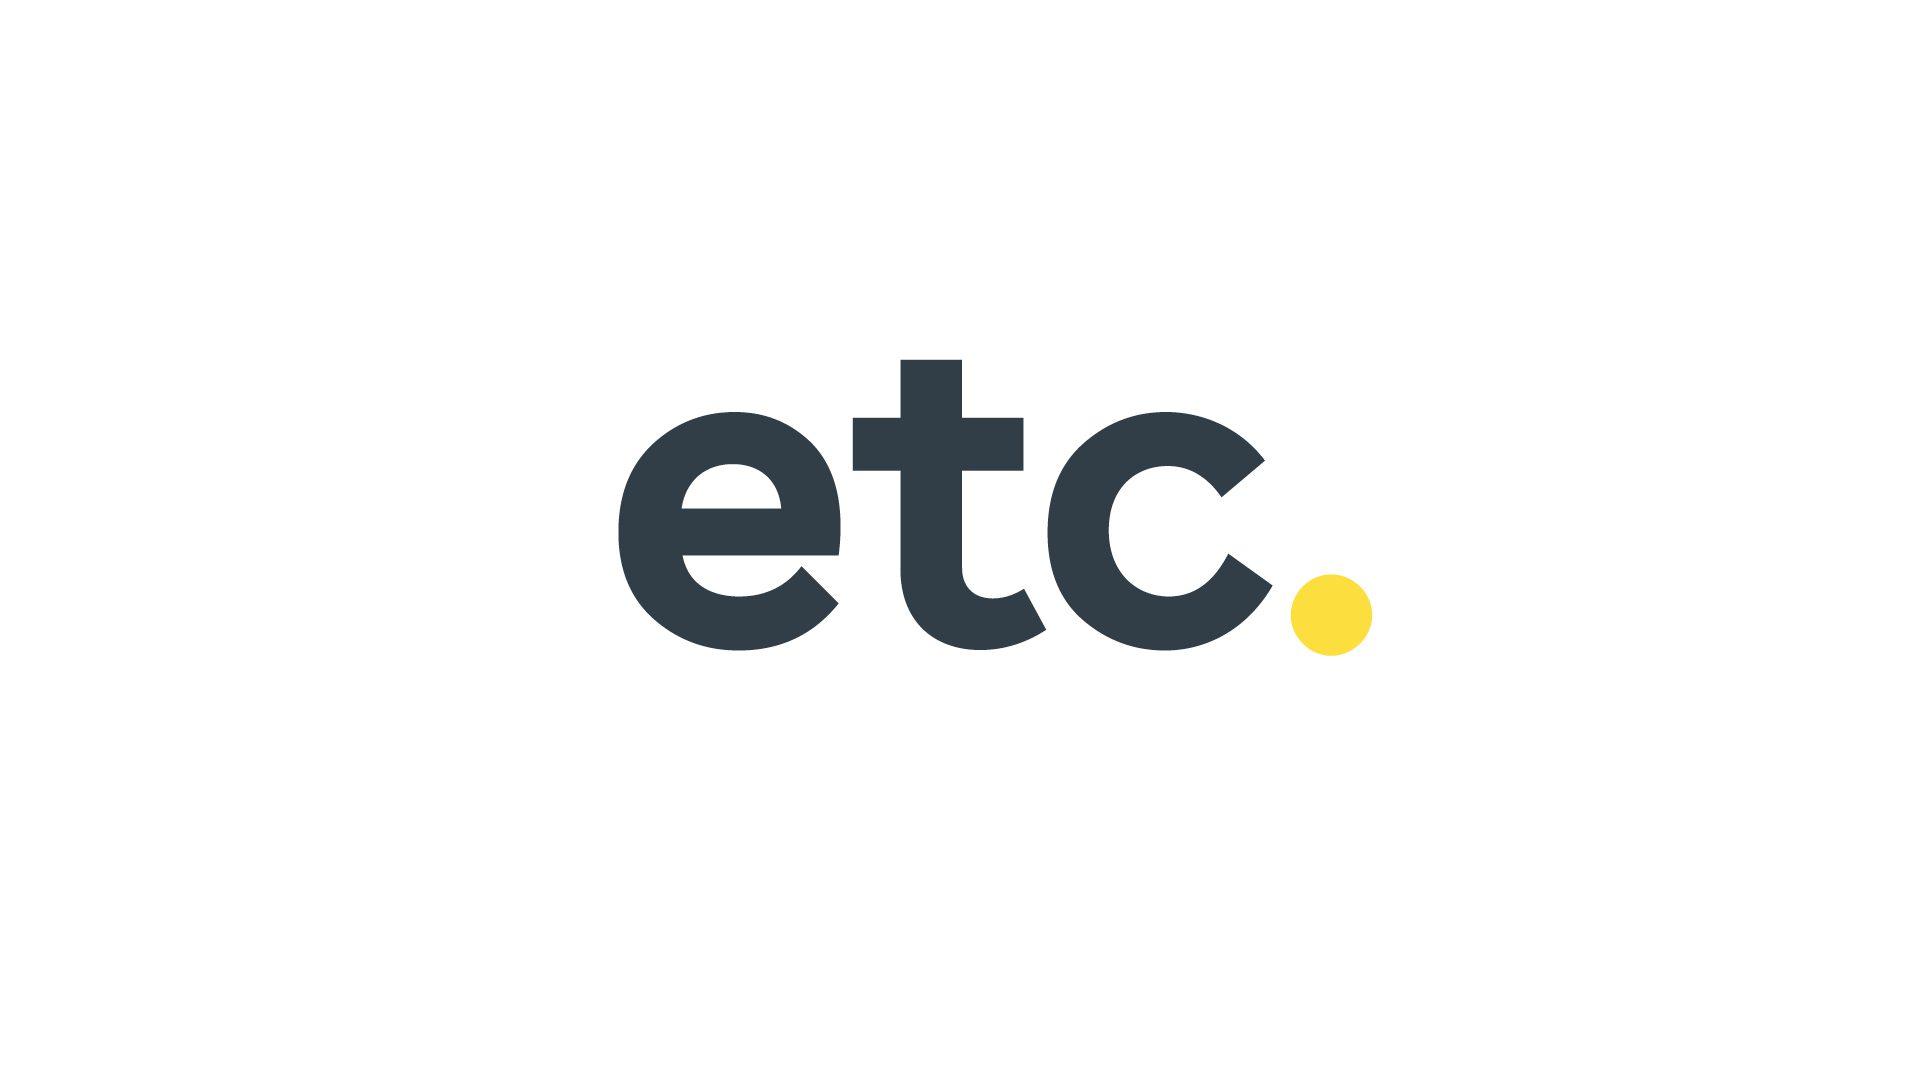 The word 'Etc.' means Etcetera, which is a Latin word that means "and so on".